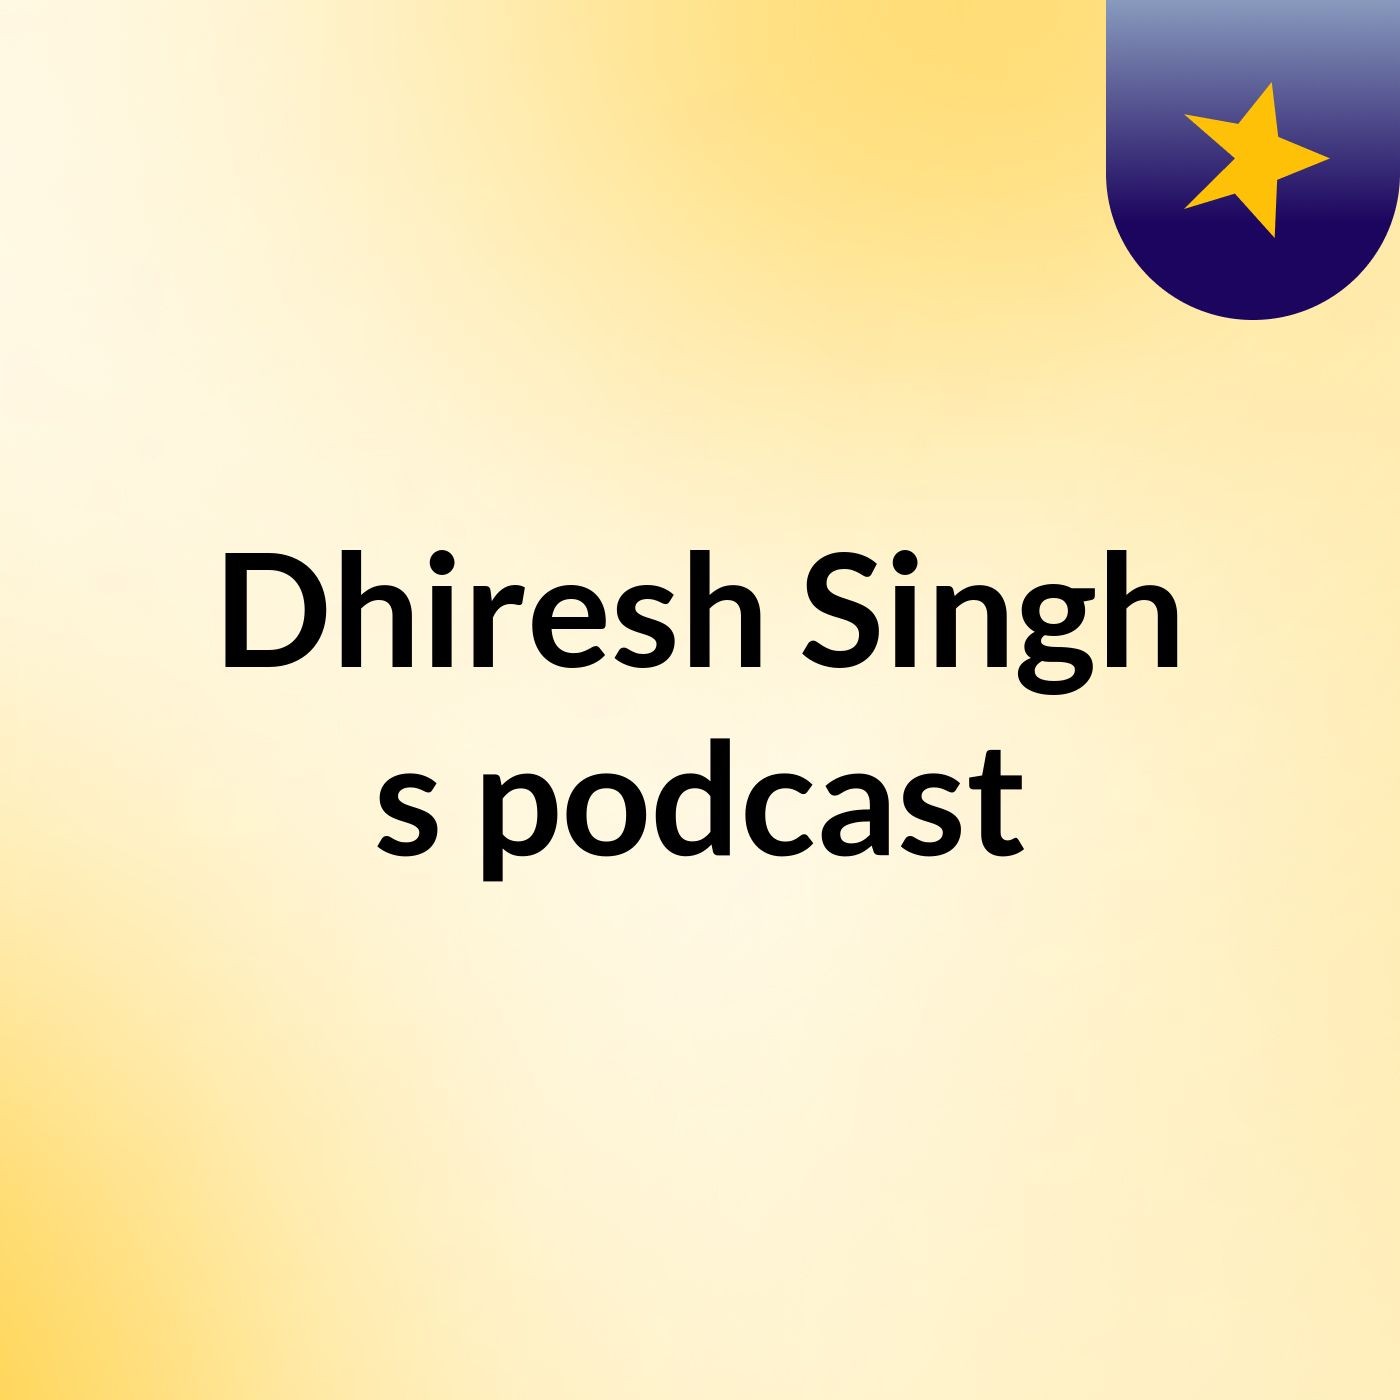 Episode 8 - Dhiresh Singh's podcast